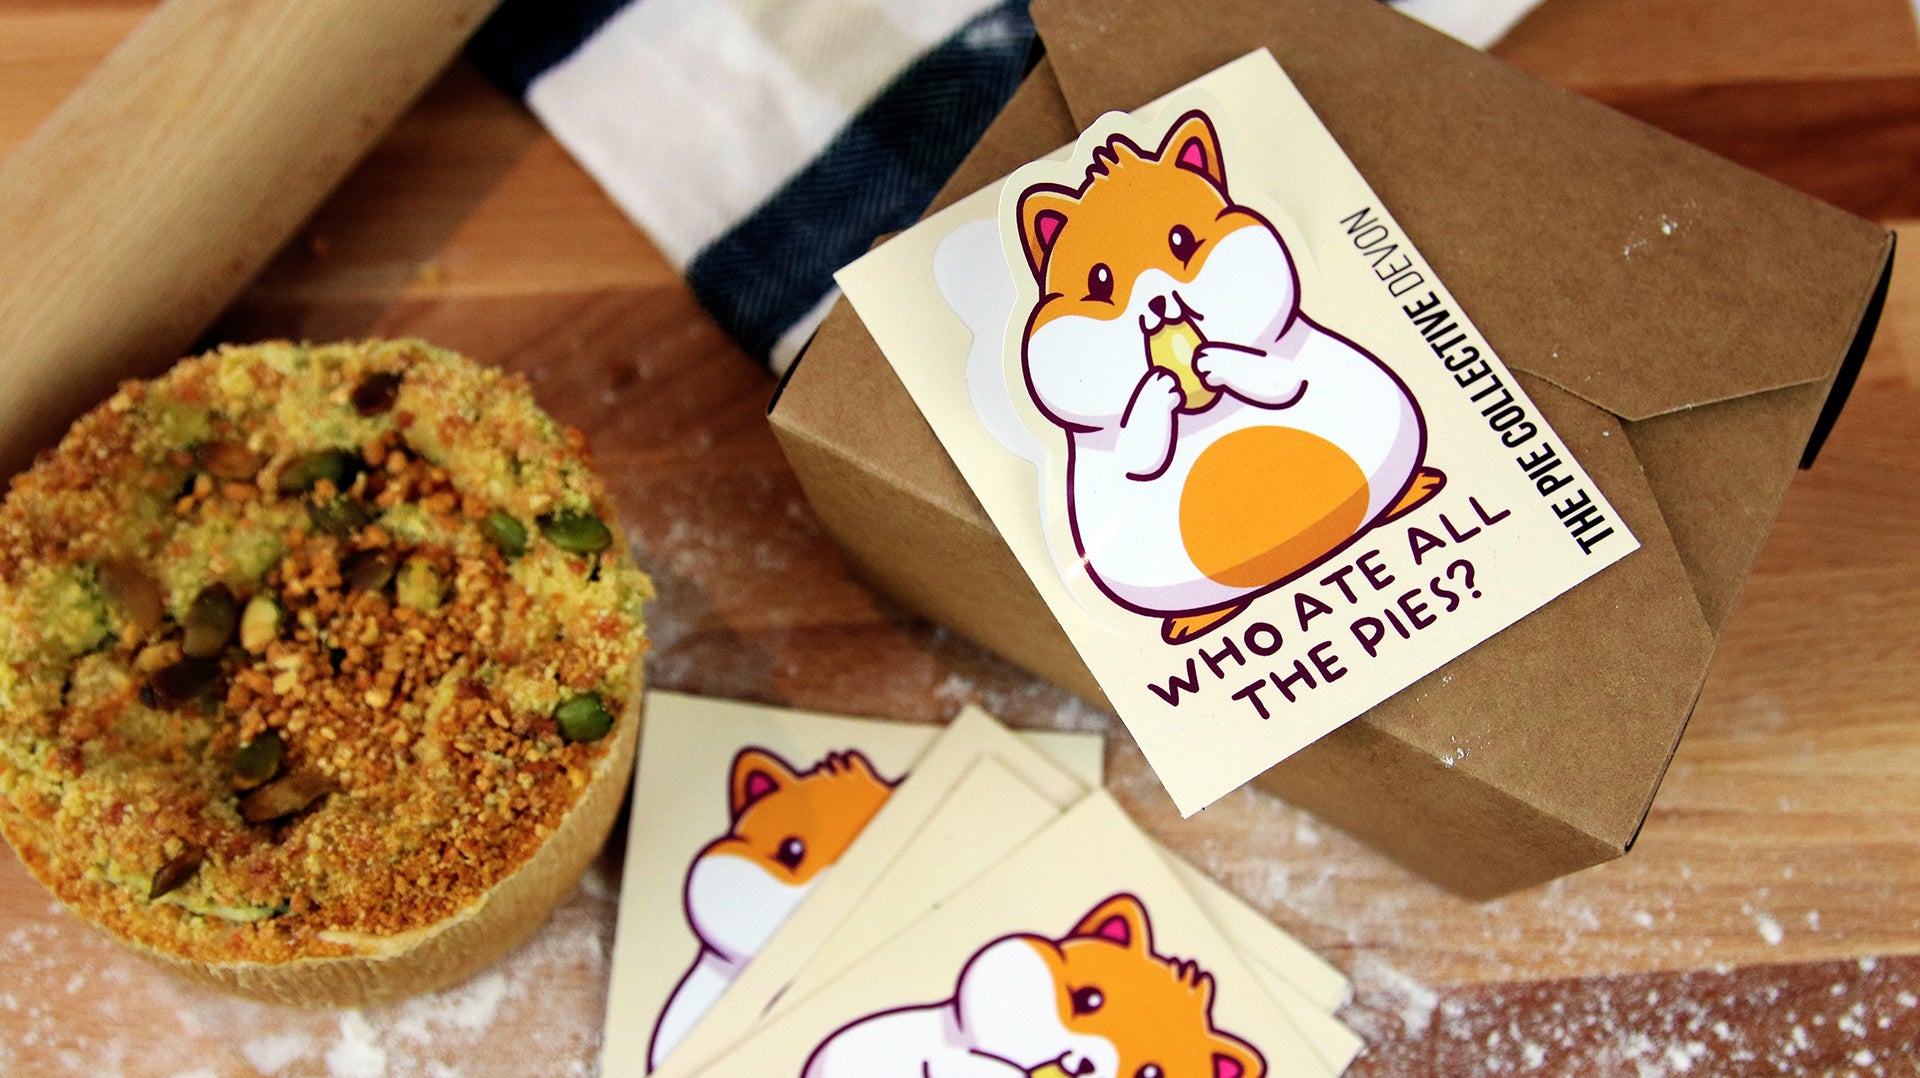 Peeled white vinyl kiss cut sticker with hamster design applied to a cardboard food box